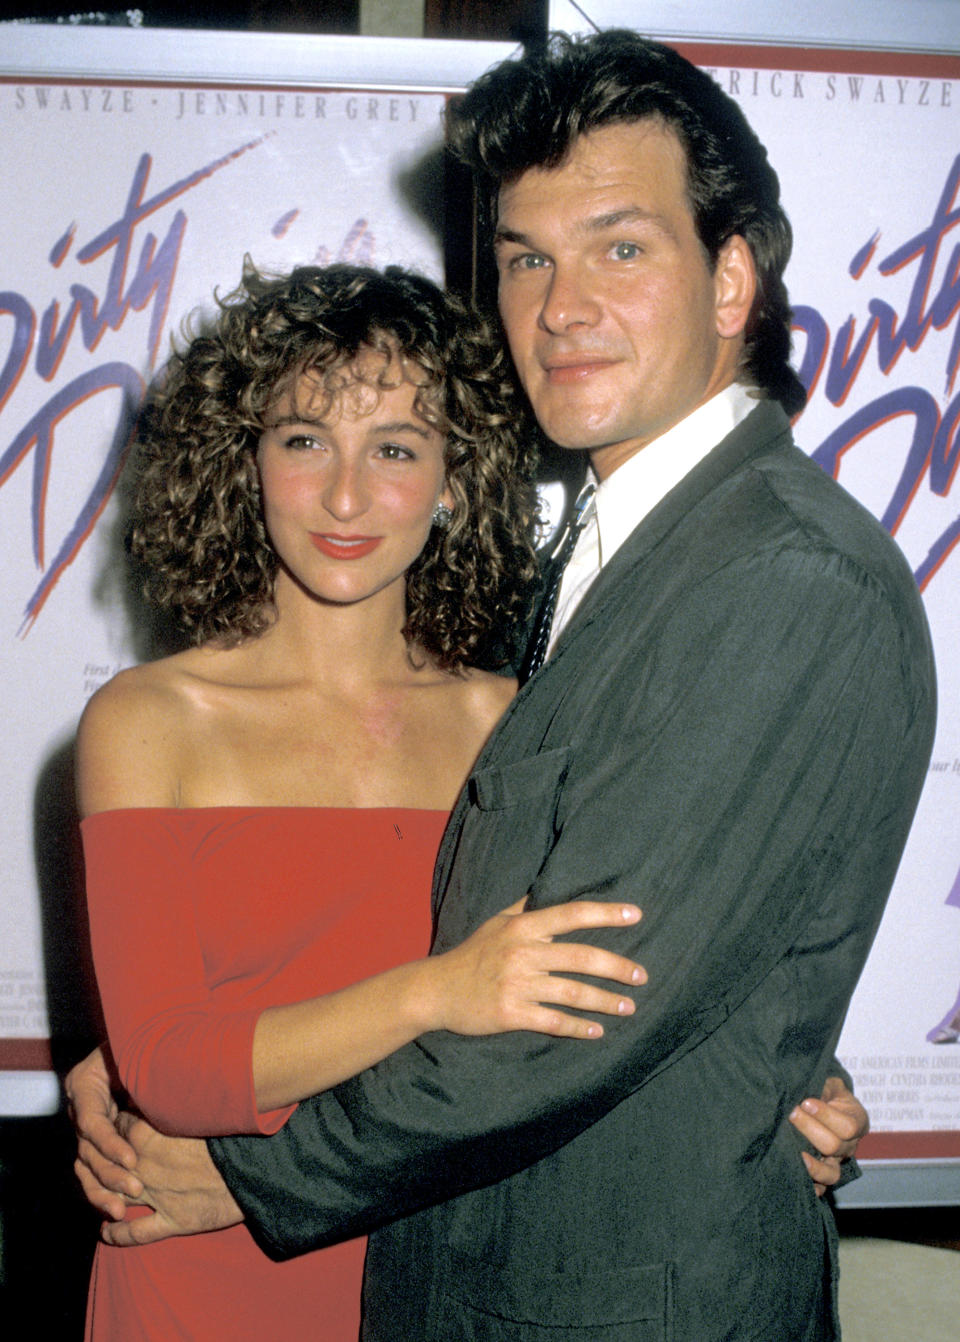 NEW YORK - AUGUST 17:  (FILE PHOTO) Actors Jennifer Grey and Patrick Swayze attend the premiere of 'Dirty Dancing' at the Gemini Theater on August 17, 1987 in New York City.  (Photo by Jim Smeal/WireImage)